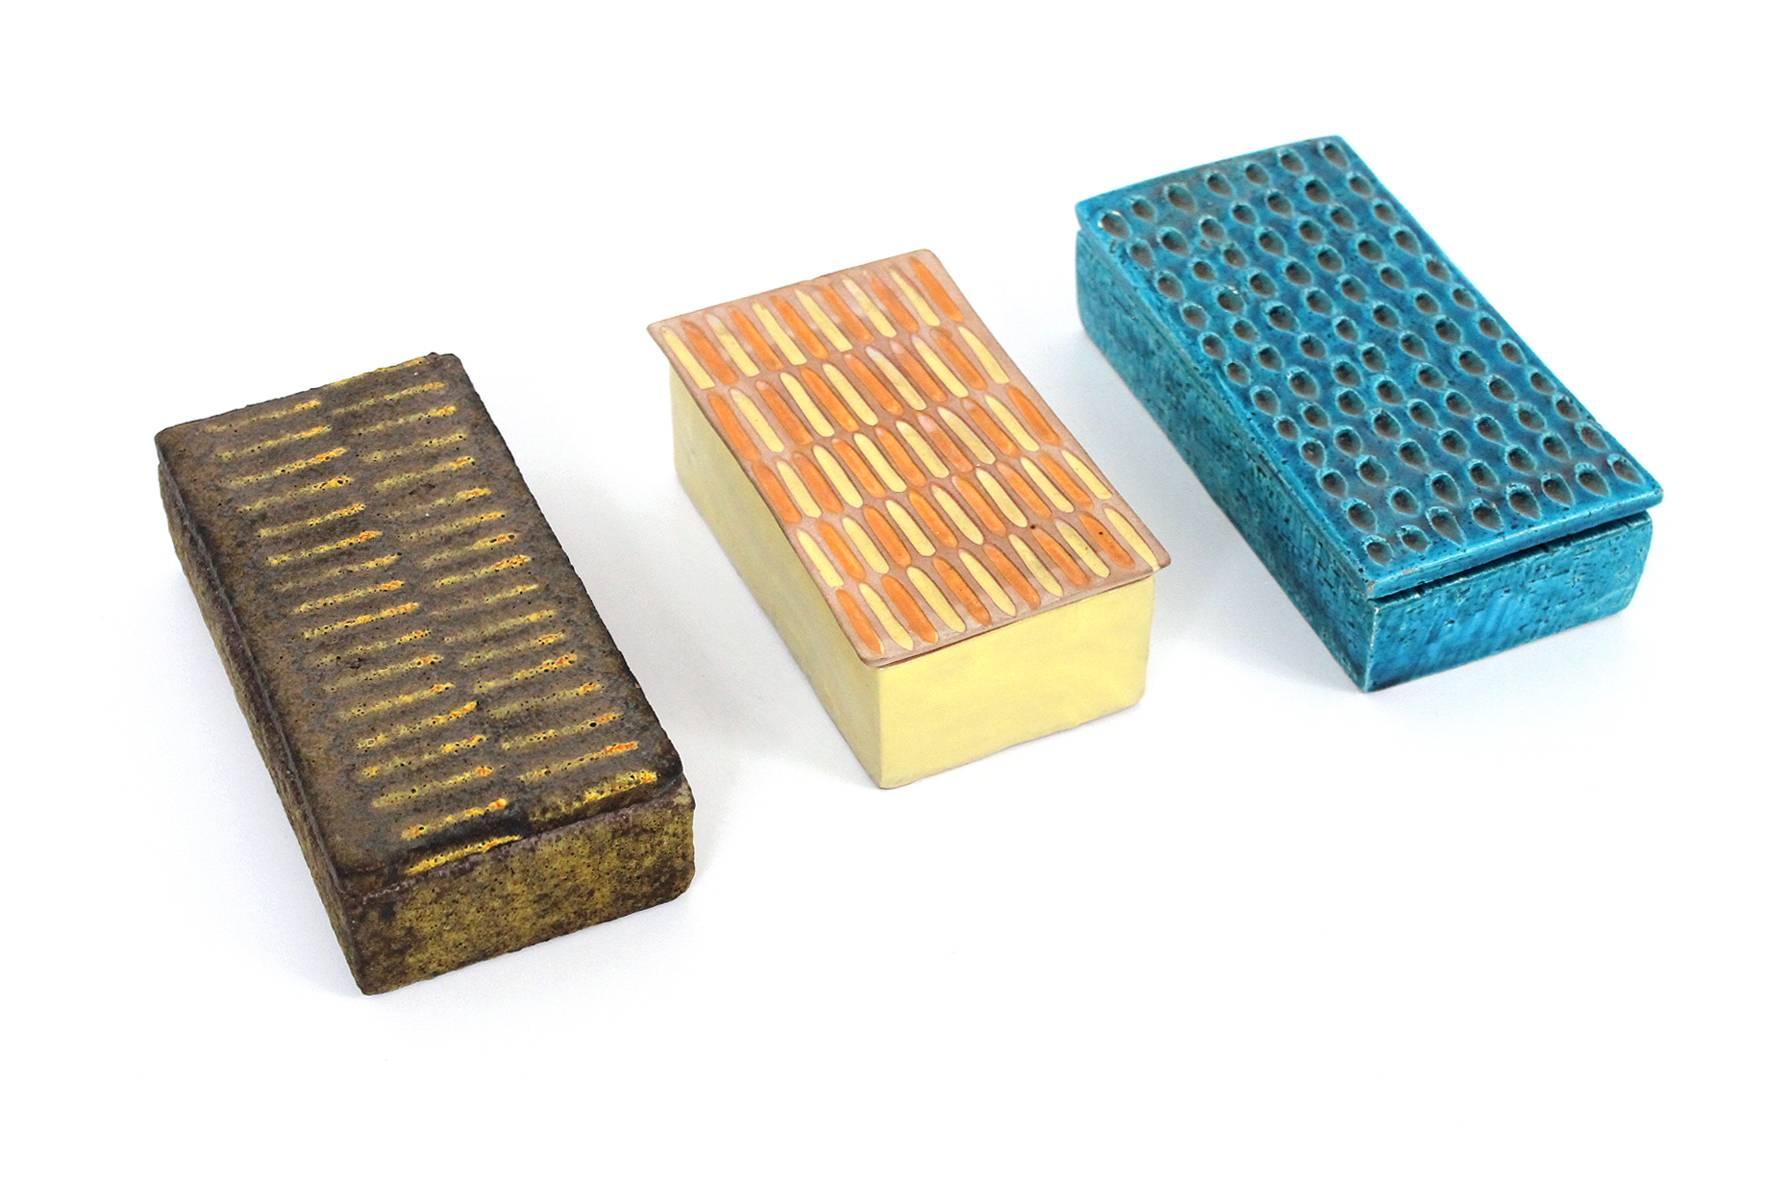 Collection of three ceramics boxes designed by Bitossi for Raymor. Wonderful glazes and textured designs. Signed with the 